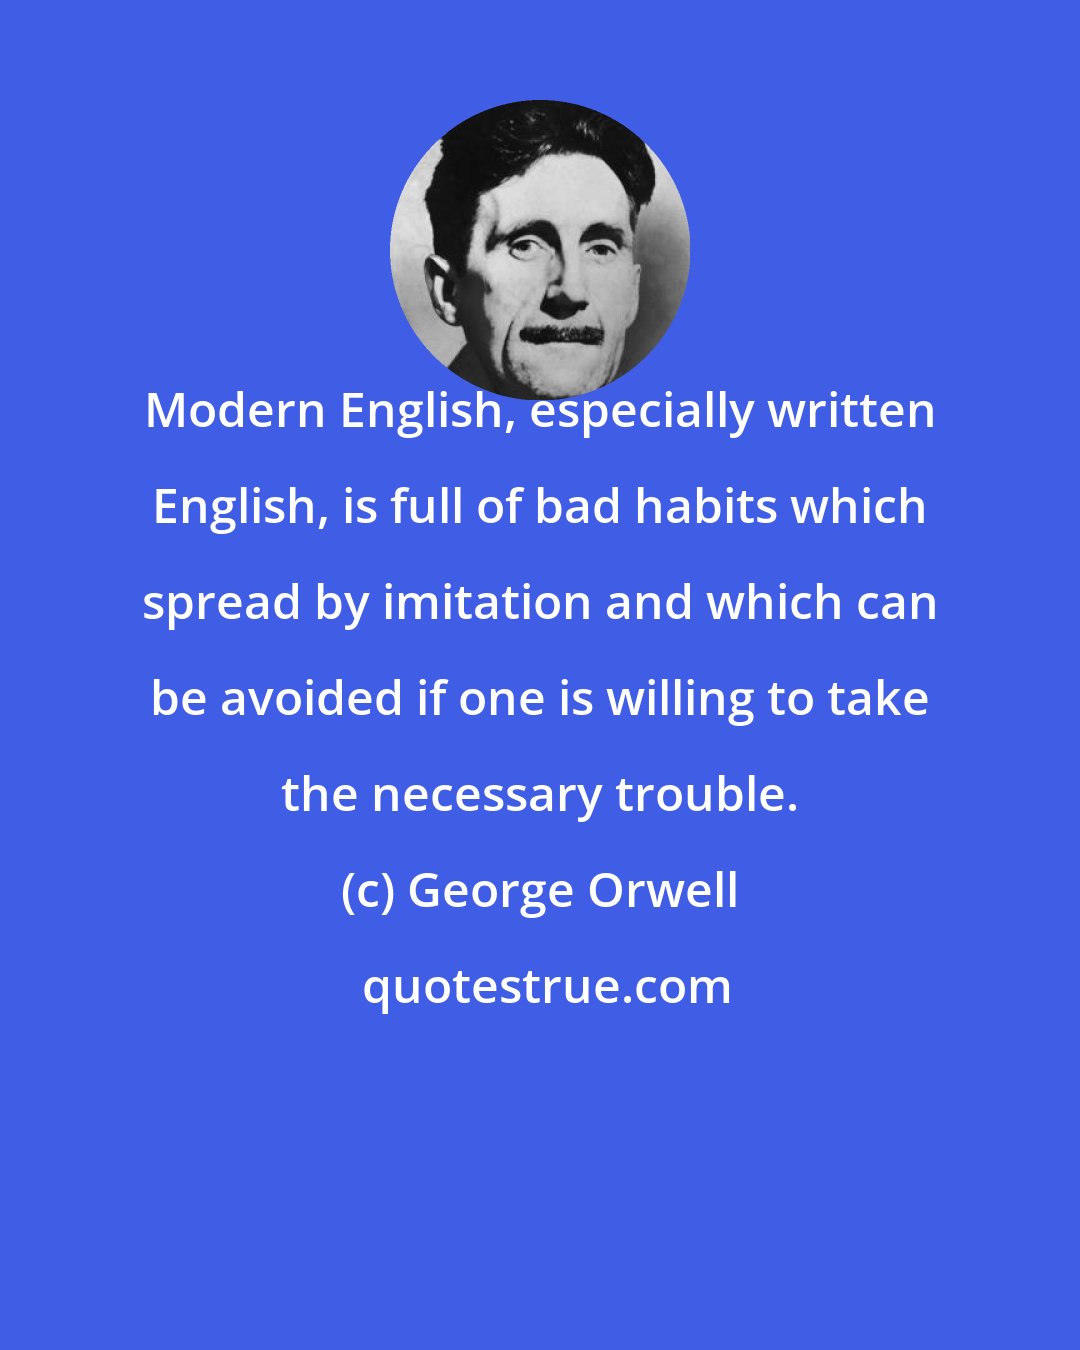 George Orwell: Modern English, especially written English, is full of bad habits which spread by imitation and which can be avoided if one is willing to take the necessary trouble.